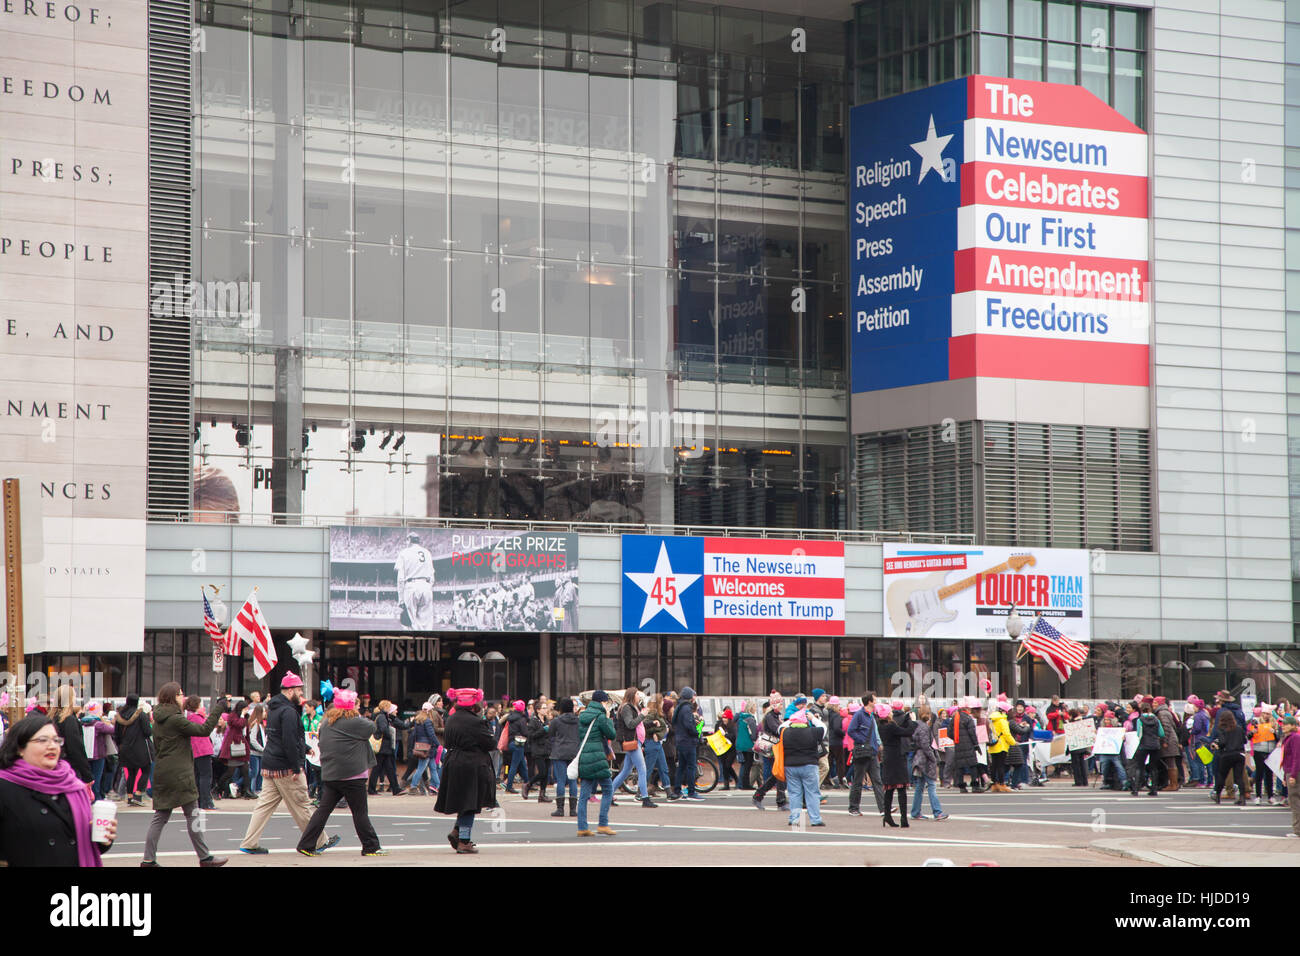 Washington, DC, USA. January 21st, 2017. Women's March on Washington, DC: The Newseum with the 1st Amendment to the Constitution edged on its facade along with inaugural sign welcoming President Trump contrasts with crowds gathering to protest President Trump's positions on women's and other human rights on women's and other human rights. Credit: Dasha Rosato/Alamy Live News Stock Photo